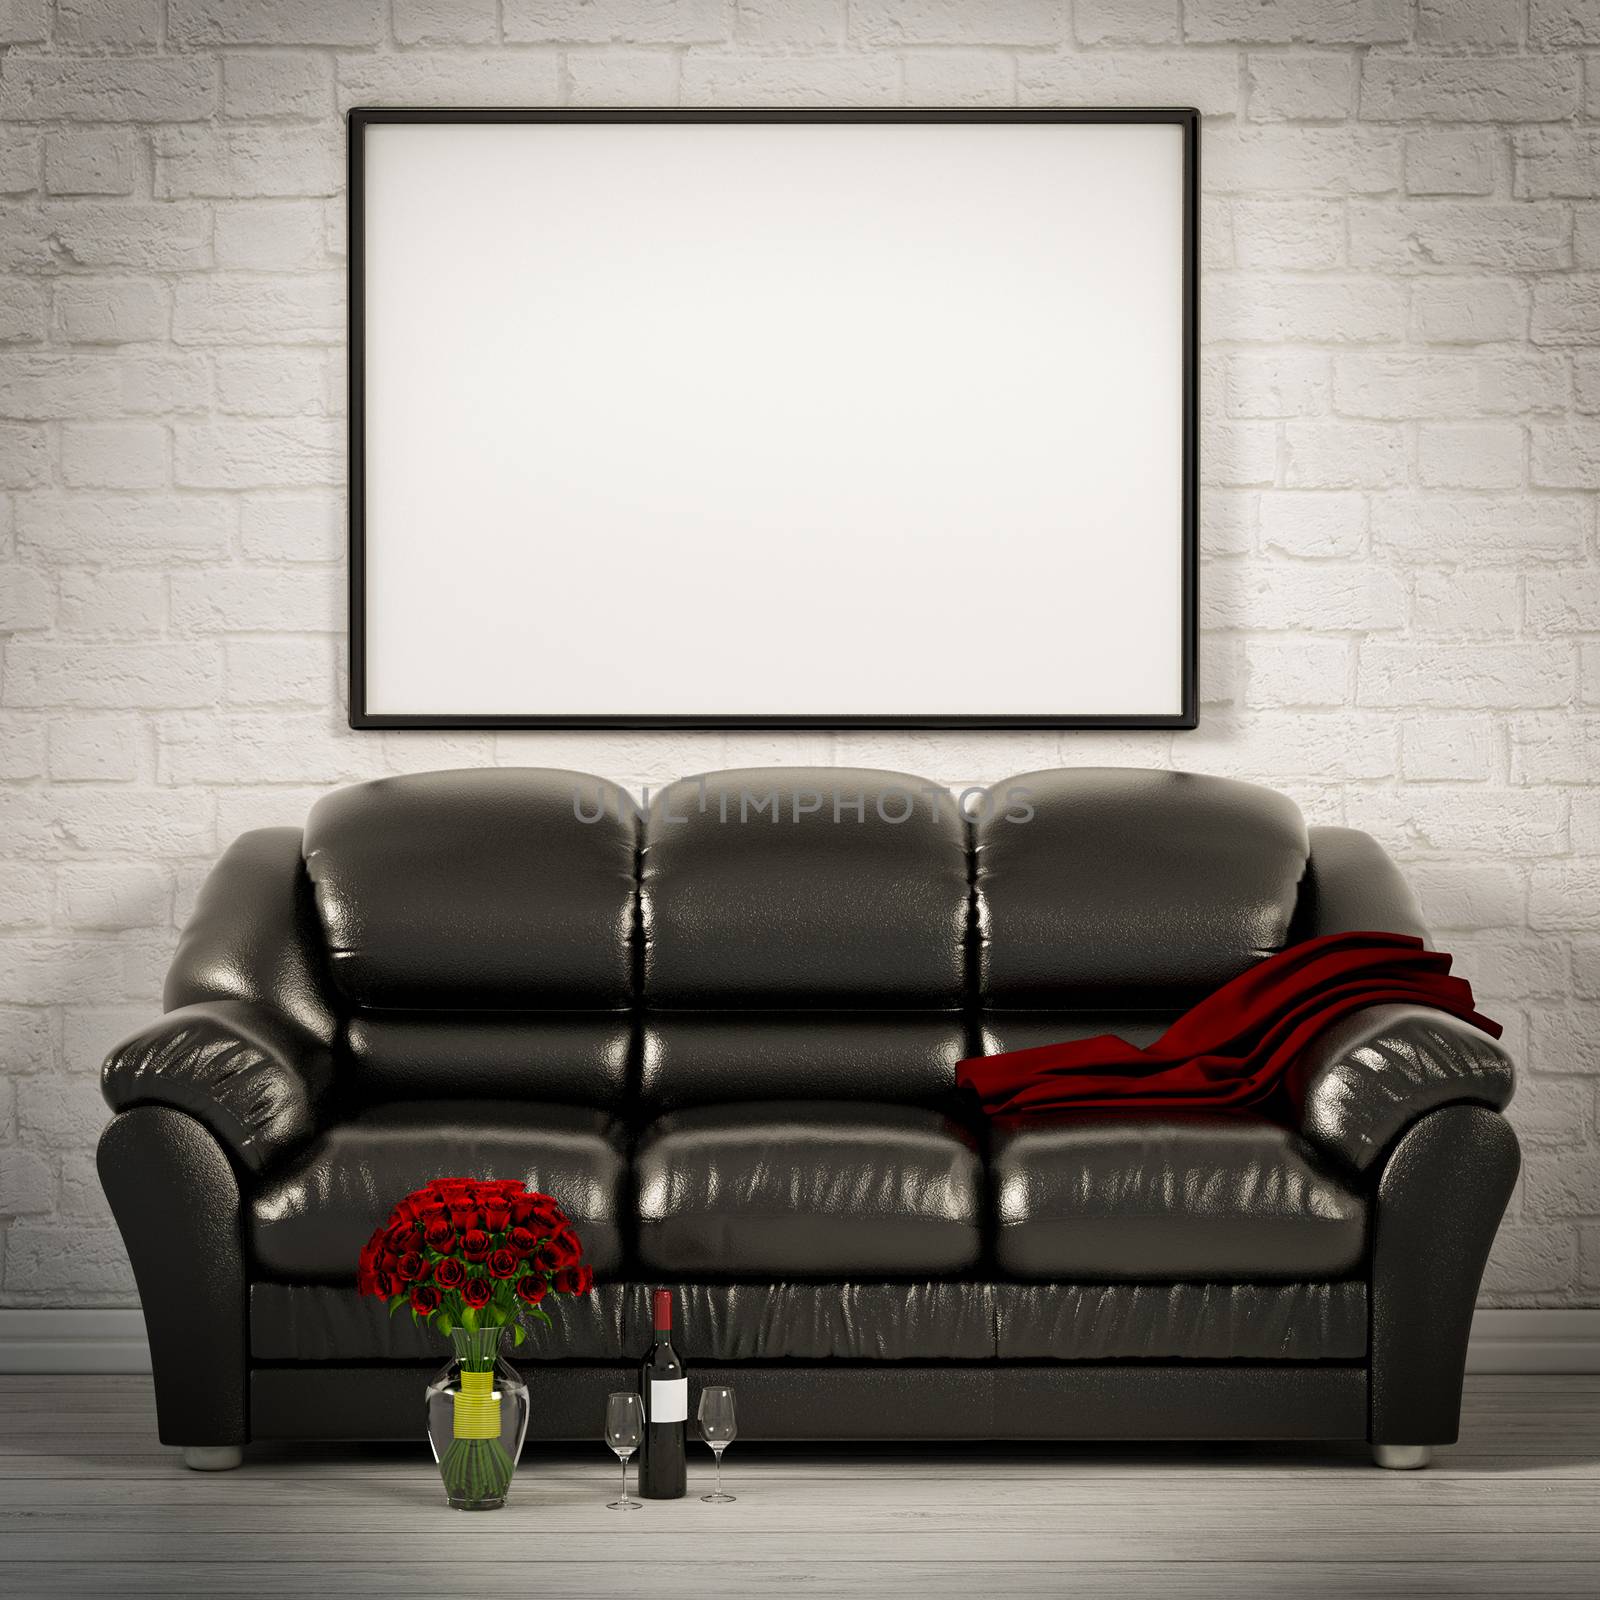 living white room with leather sofa 3d illustration by Lupen